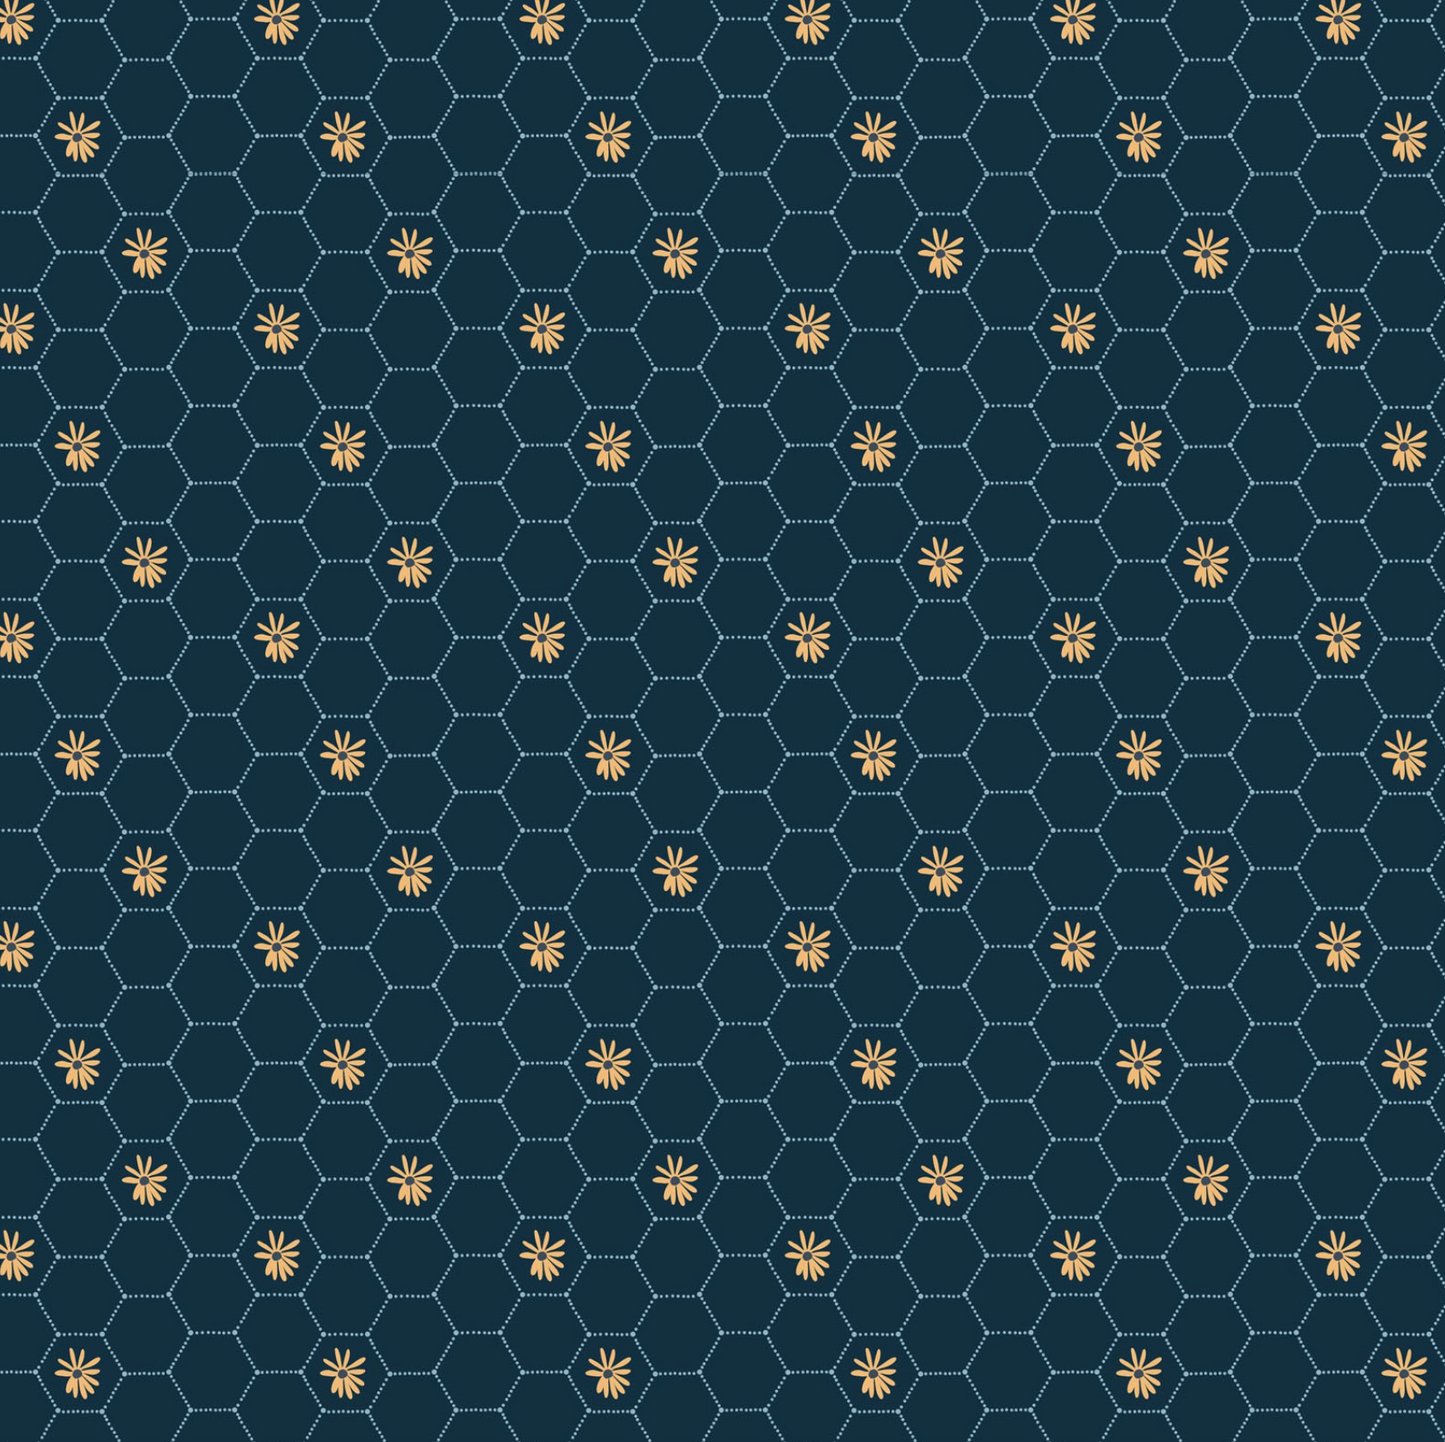 Sunshine & Chamomile, Honeycomb, Navy,SC23511, sold by the 1/2 yard